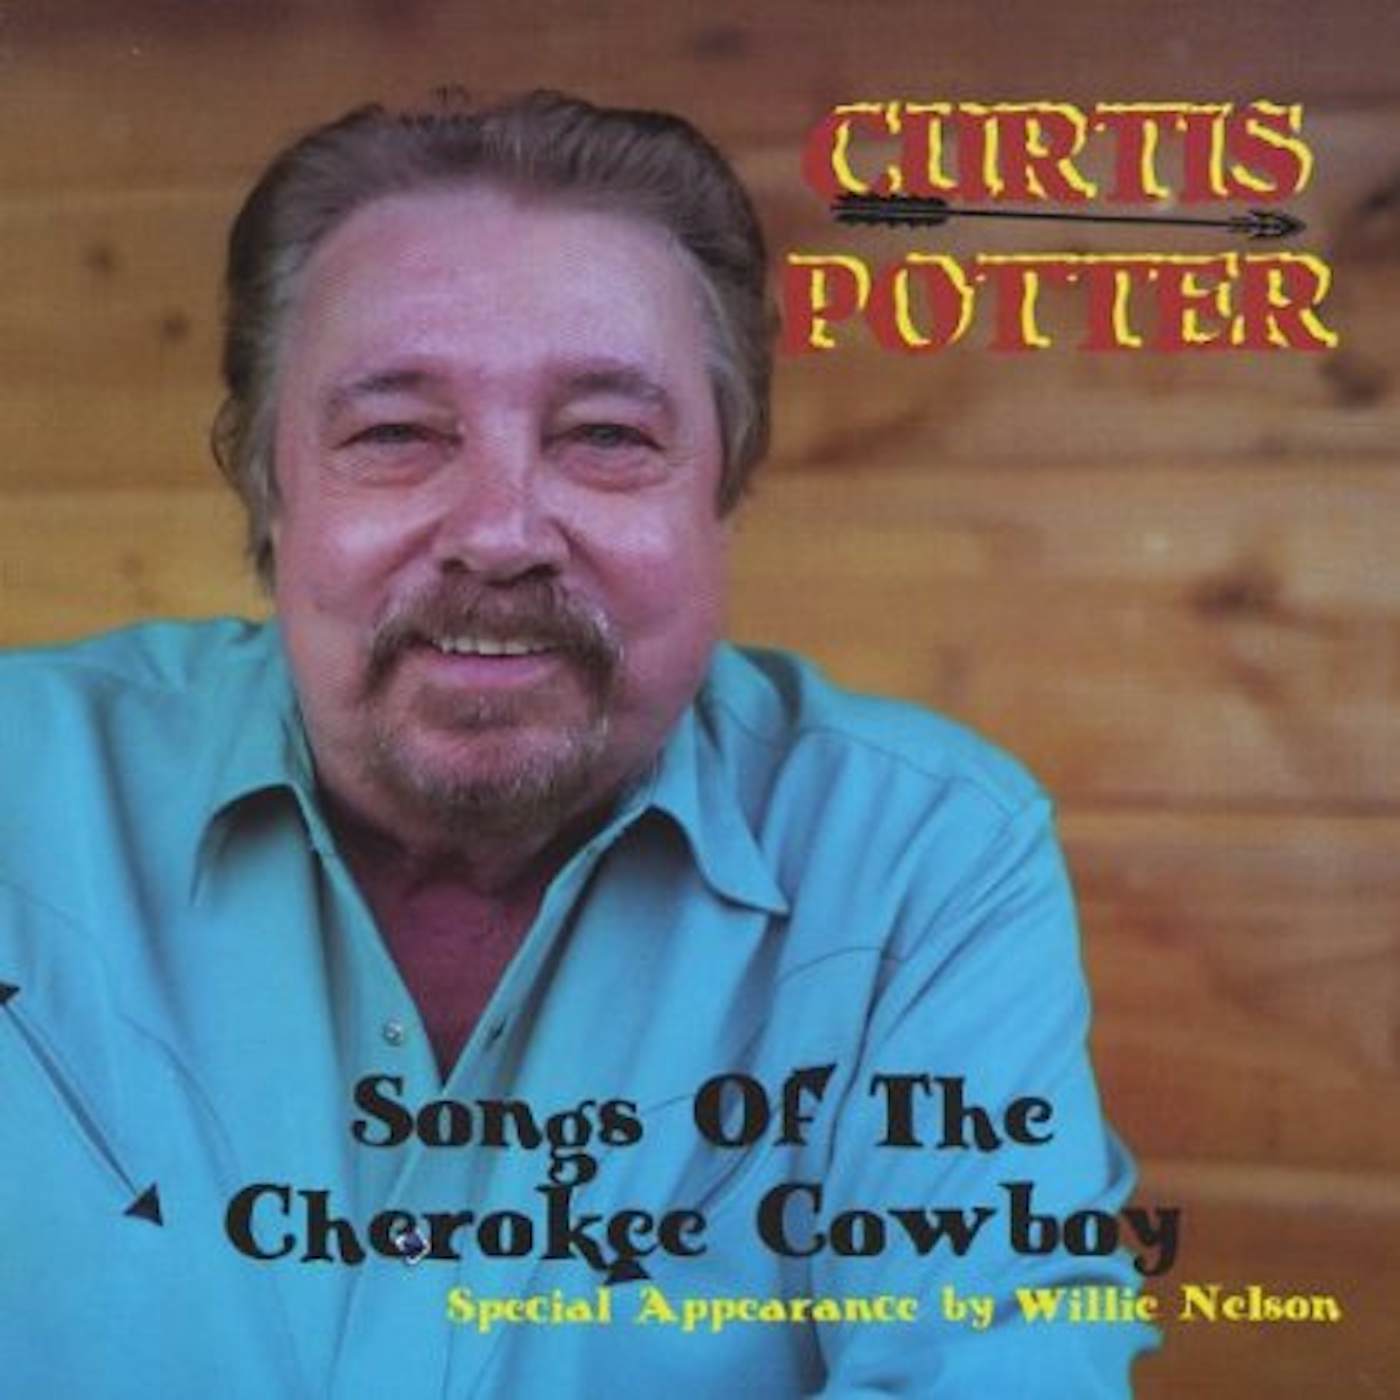 Curtis Potter SONGS OF CHEROKEE COWBOY (TRIBUTE TO RAY PRICE) CD